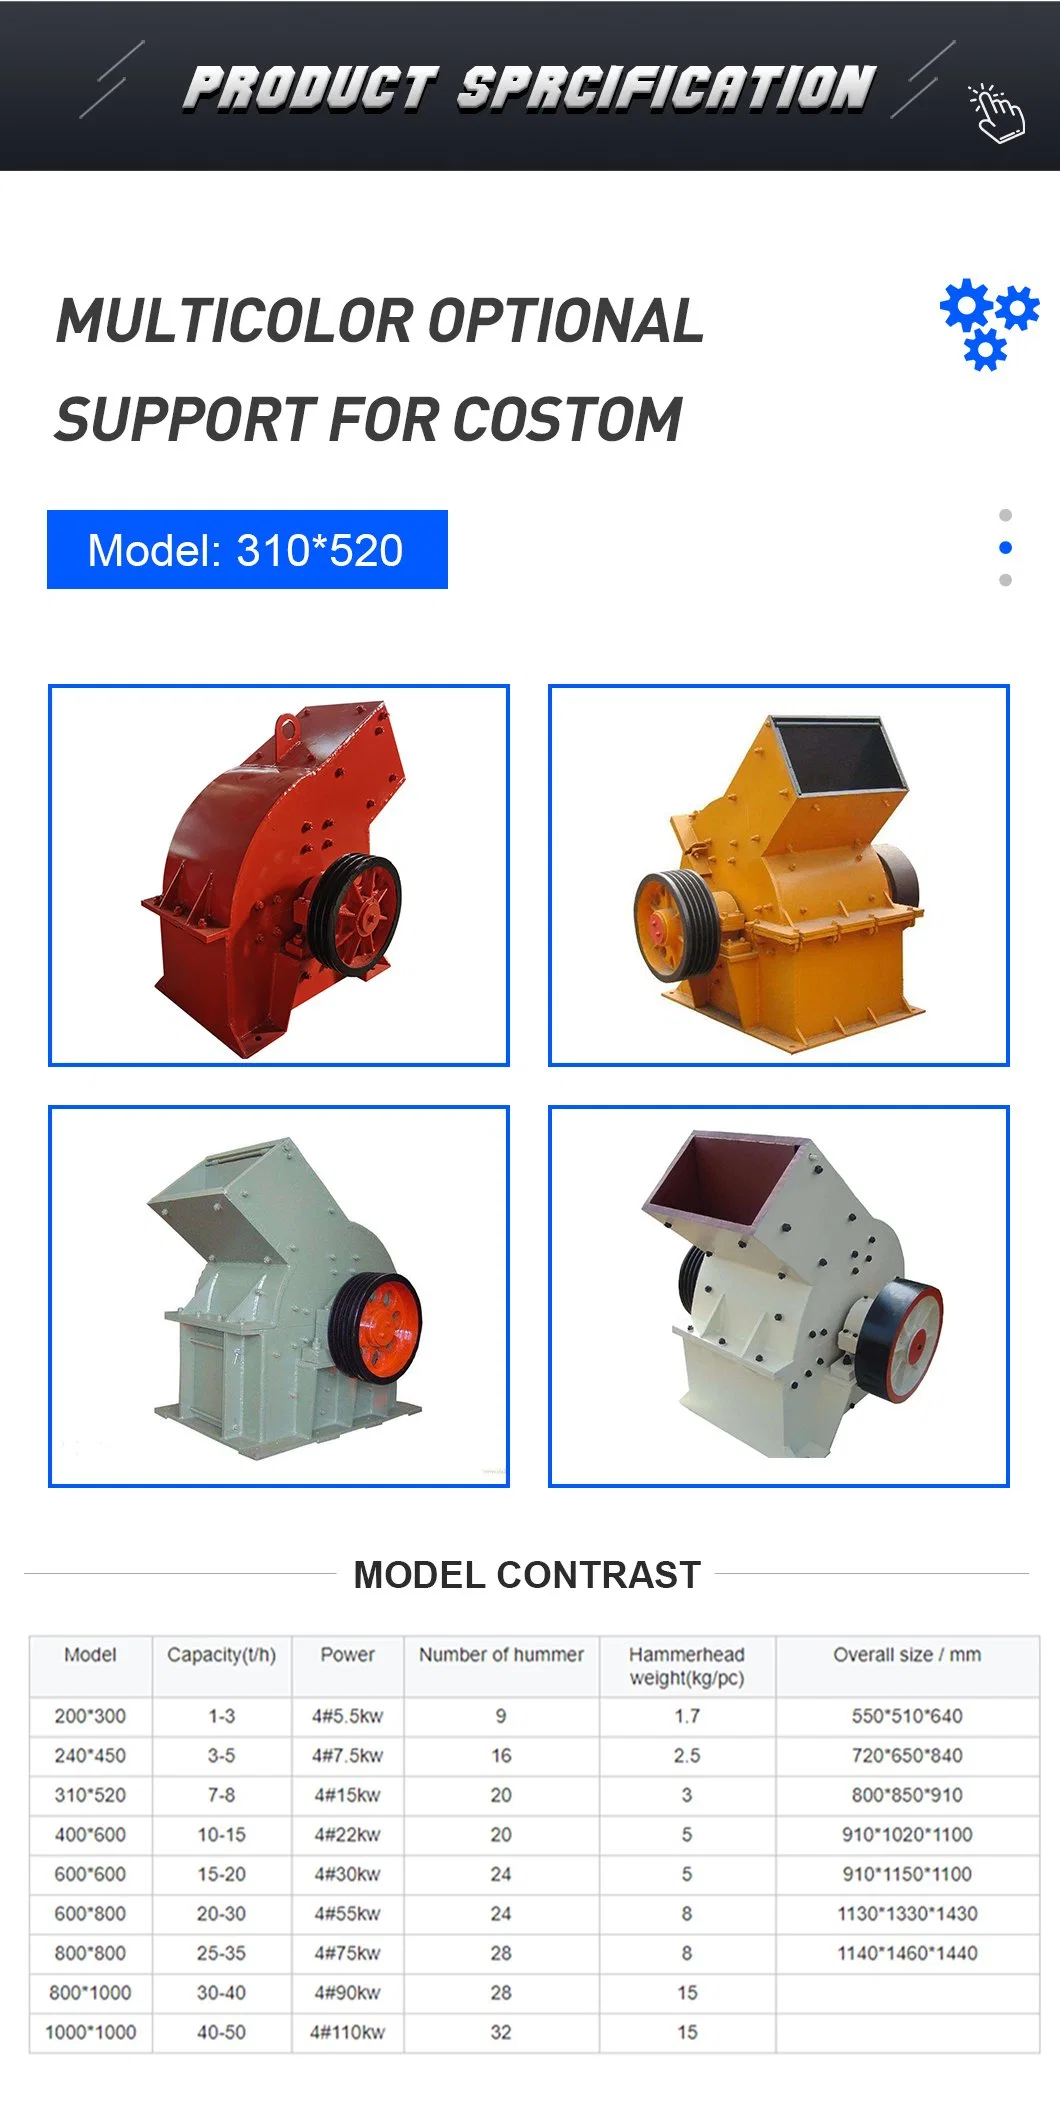 PC 240 Hammer Crusher Spare Parts Factory Supplier Hot Sale China Best Quality Portable Cheap Stone Crushing Machines with Factory Price 2023 New Tech 17